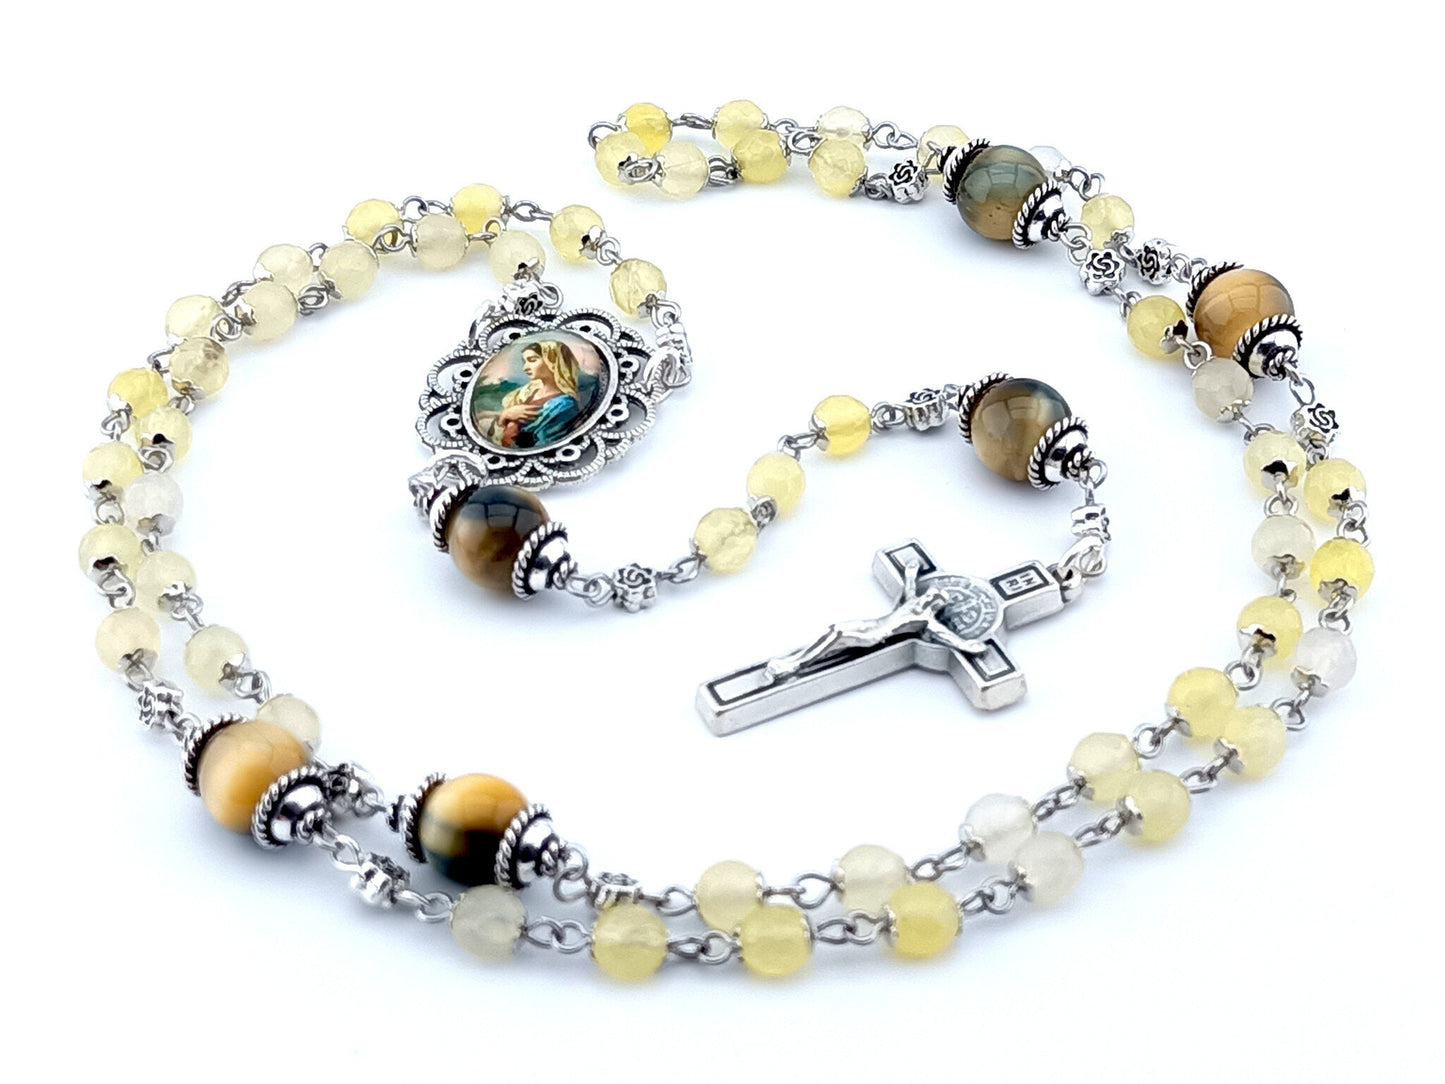 Our Lady's Fiat unique rosary beads with yellow faceted agate gemstone beads, tigers eye pater beads, silver Saint Benedict crucifix and picture centre medal.